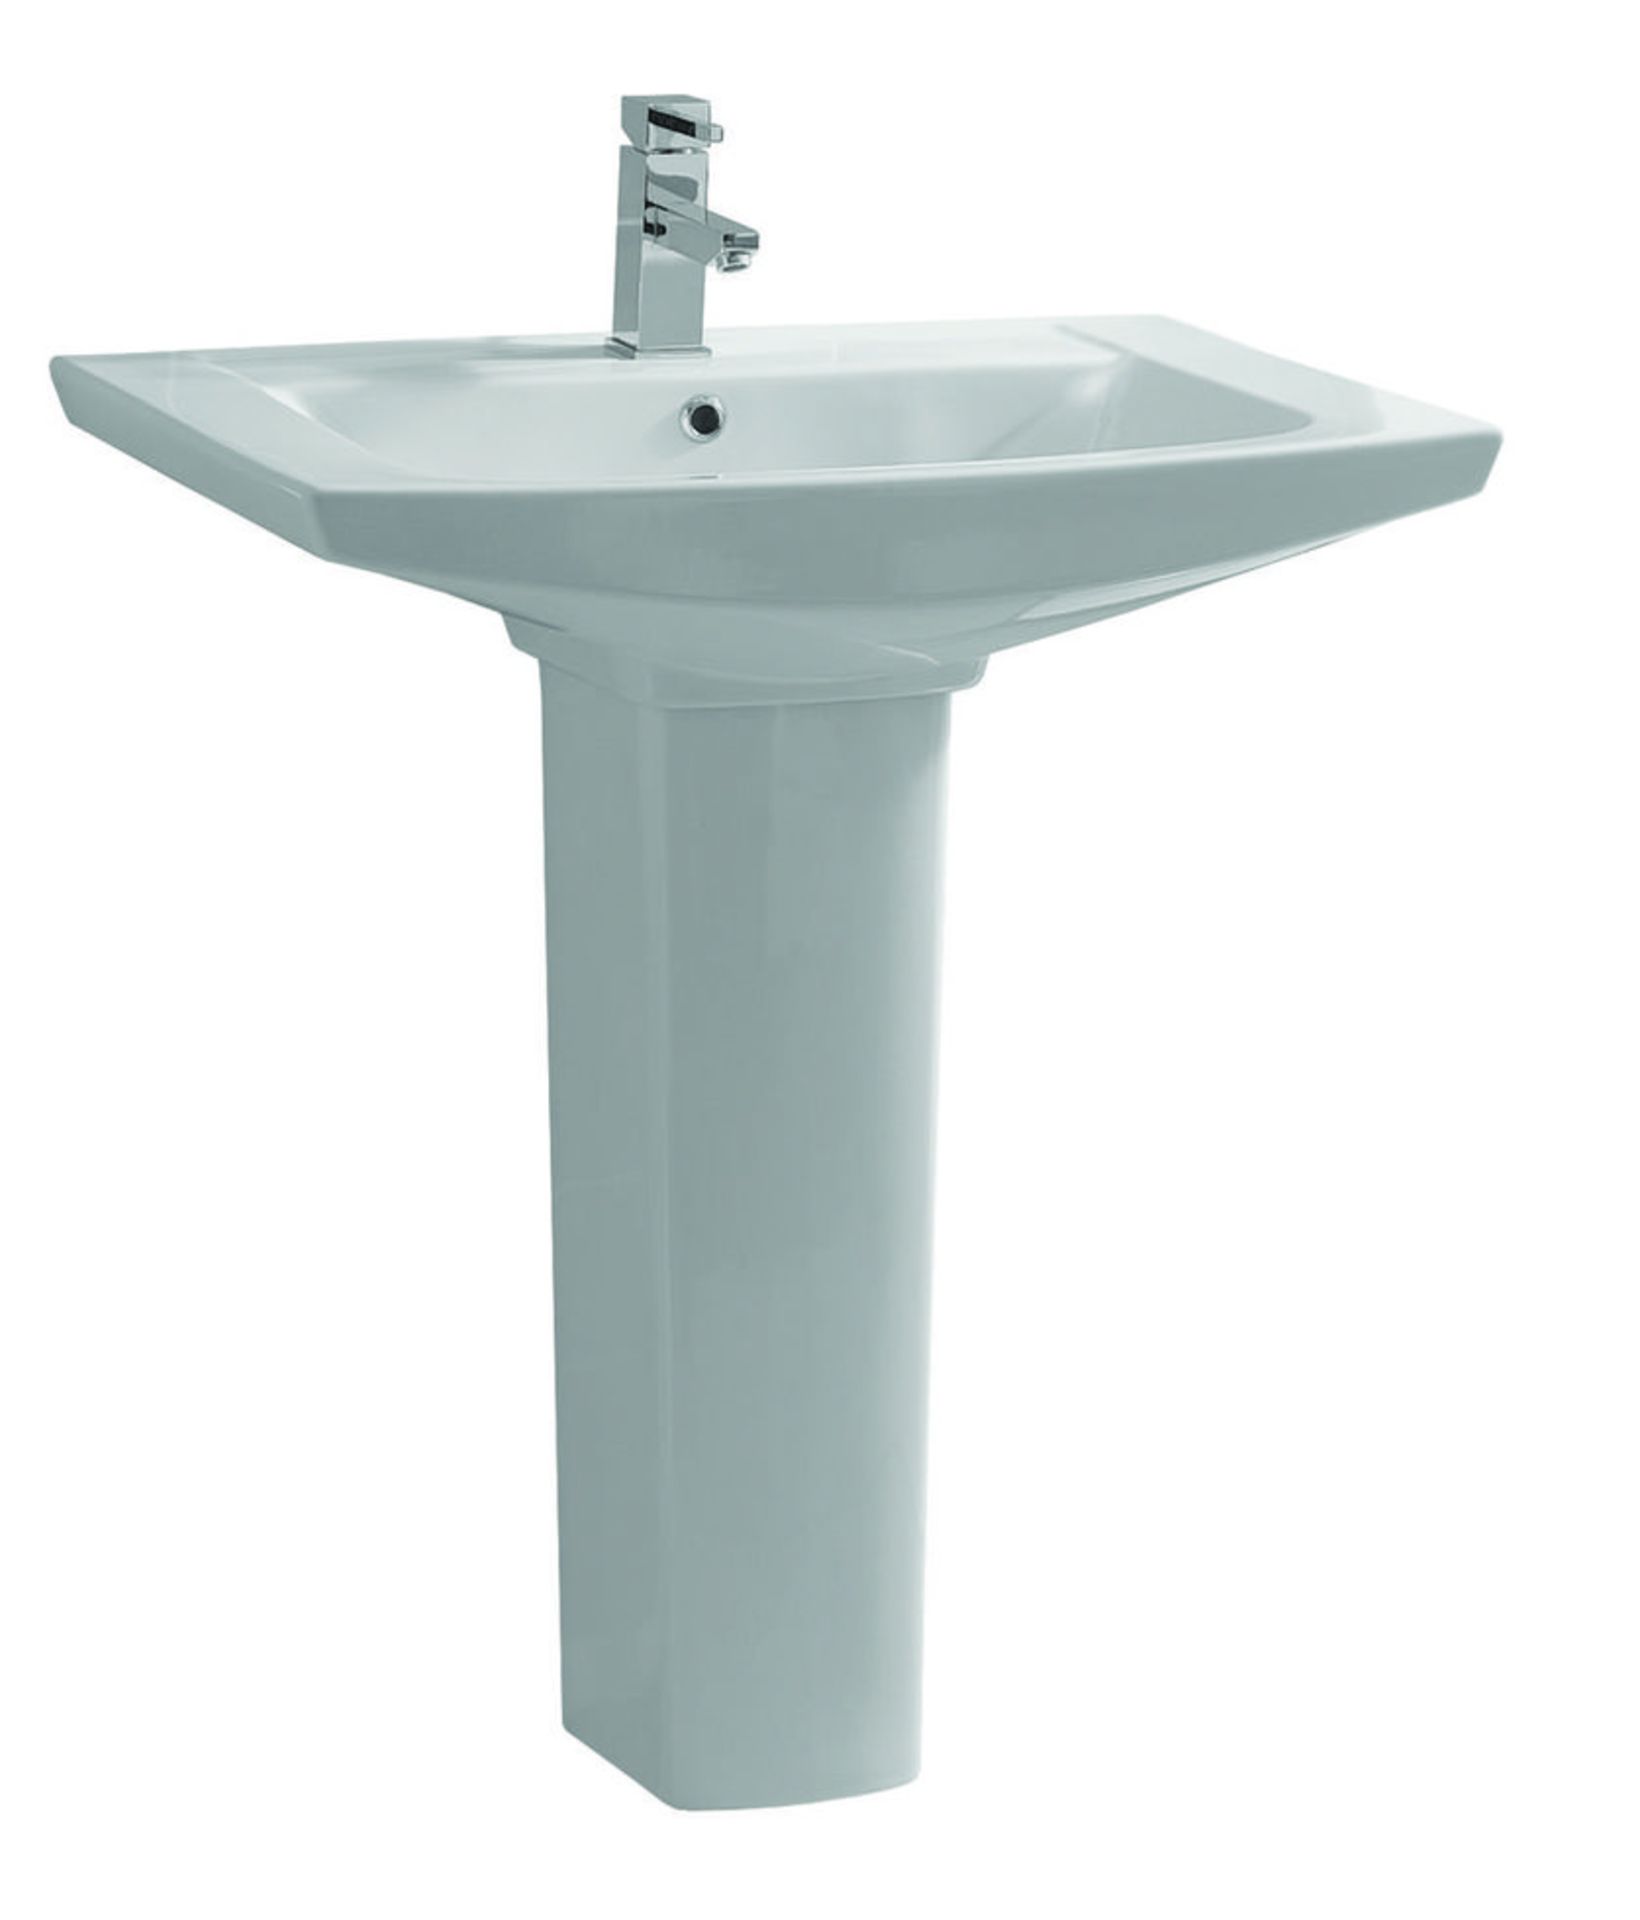 1 x Caprice Single Tap Hole Sink Basin With Full Pedestal - Vogue Bathrooms - 71cm Width - Brand New